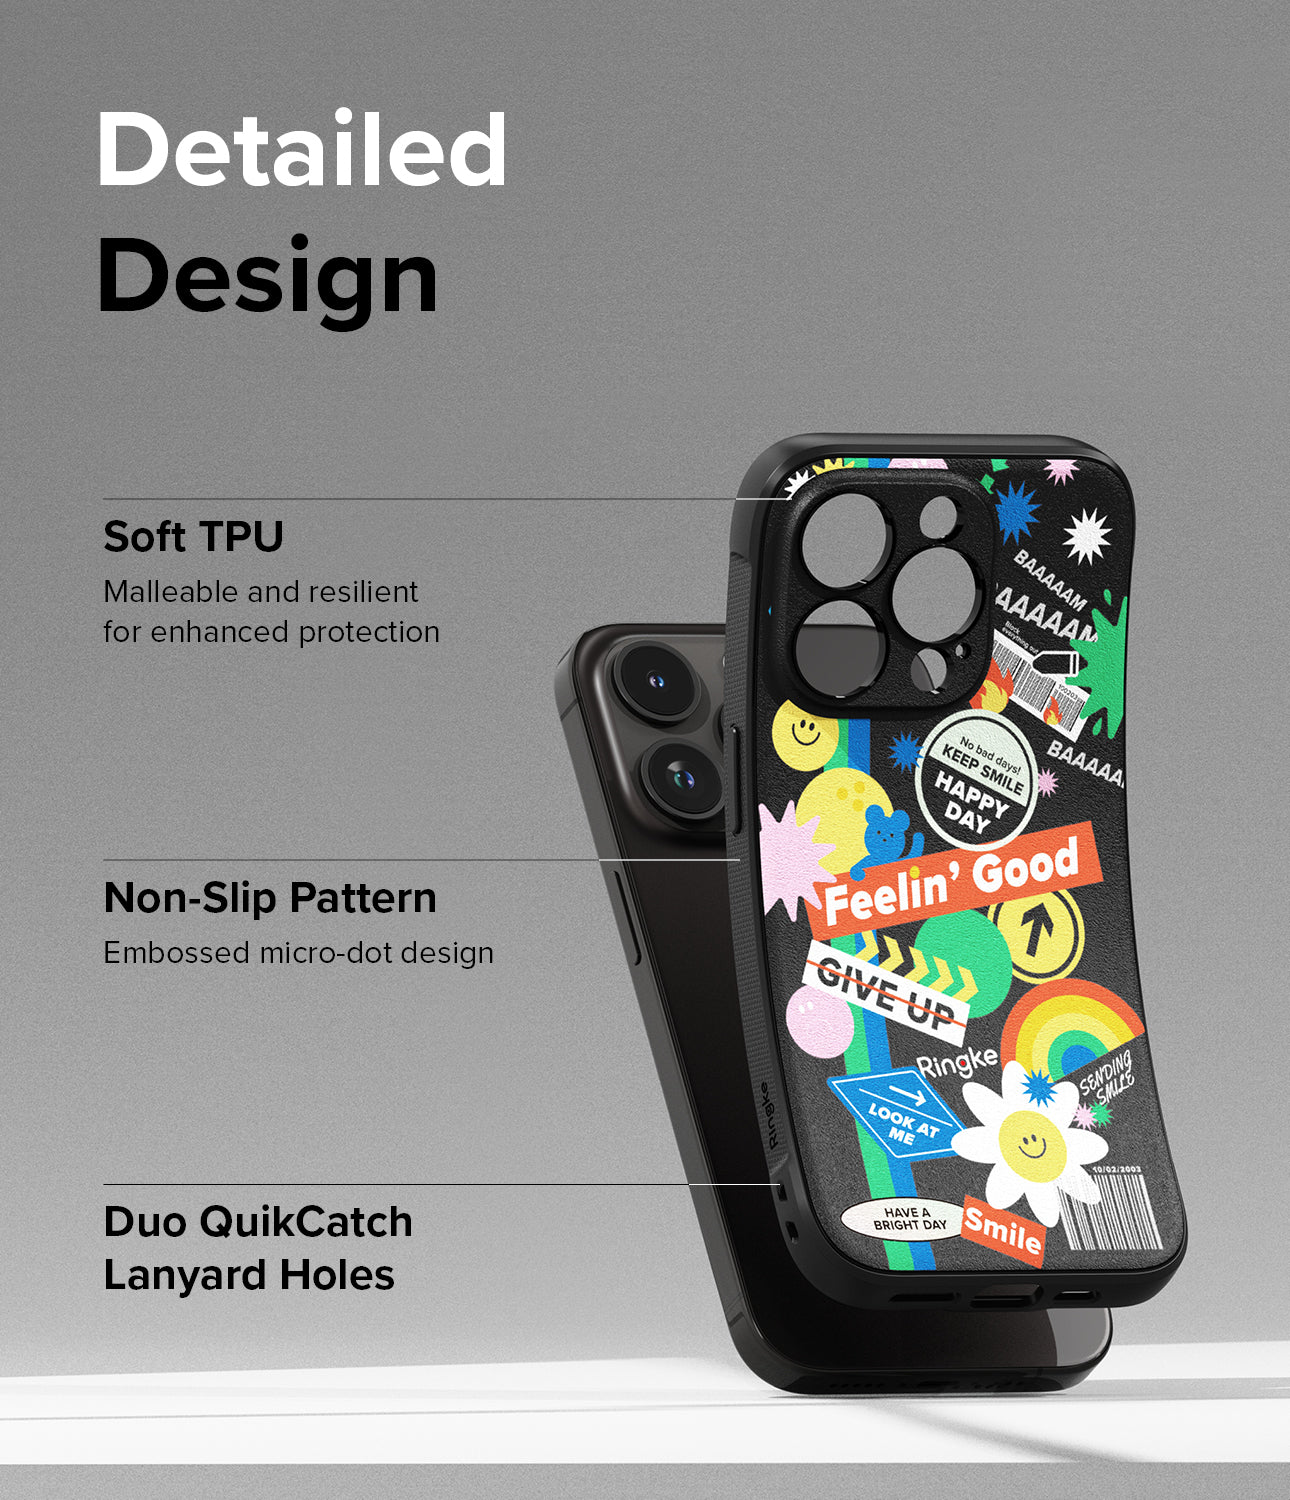 iPhone 15 Pro Max Case | Onyx Design - Sticker - Detailed Design. Malleable and resilient for enhanced protection with Soft TPU. Embossed micro-dot design with Non-Slip Pattern. Duo QuikCatch Lanyard Holes.